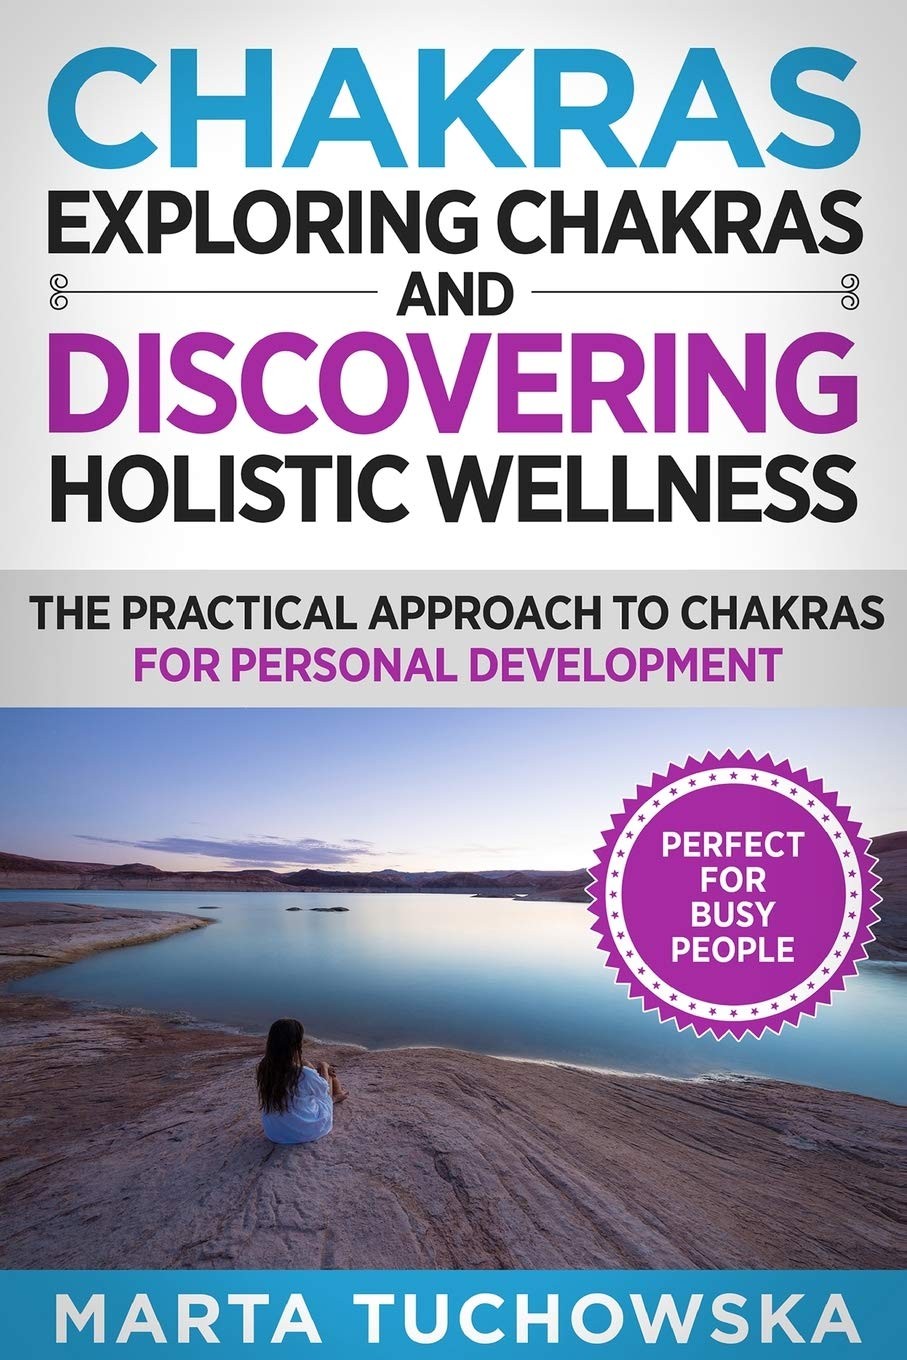 Chakras: Exploring Chakras and Discovering Holistic Wellness-The Practical Approach to Chakras for Personal Development